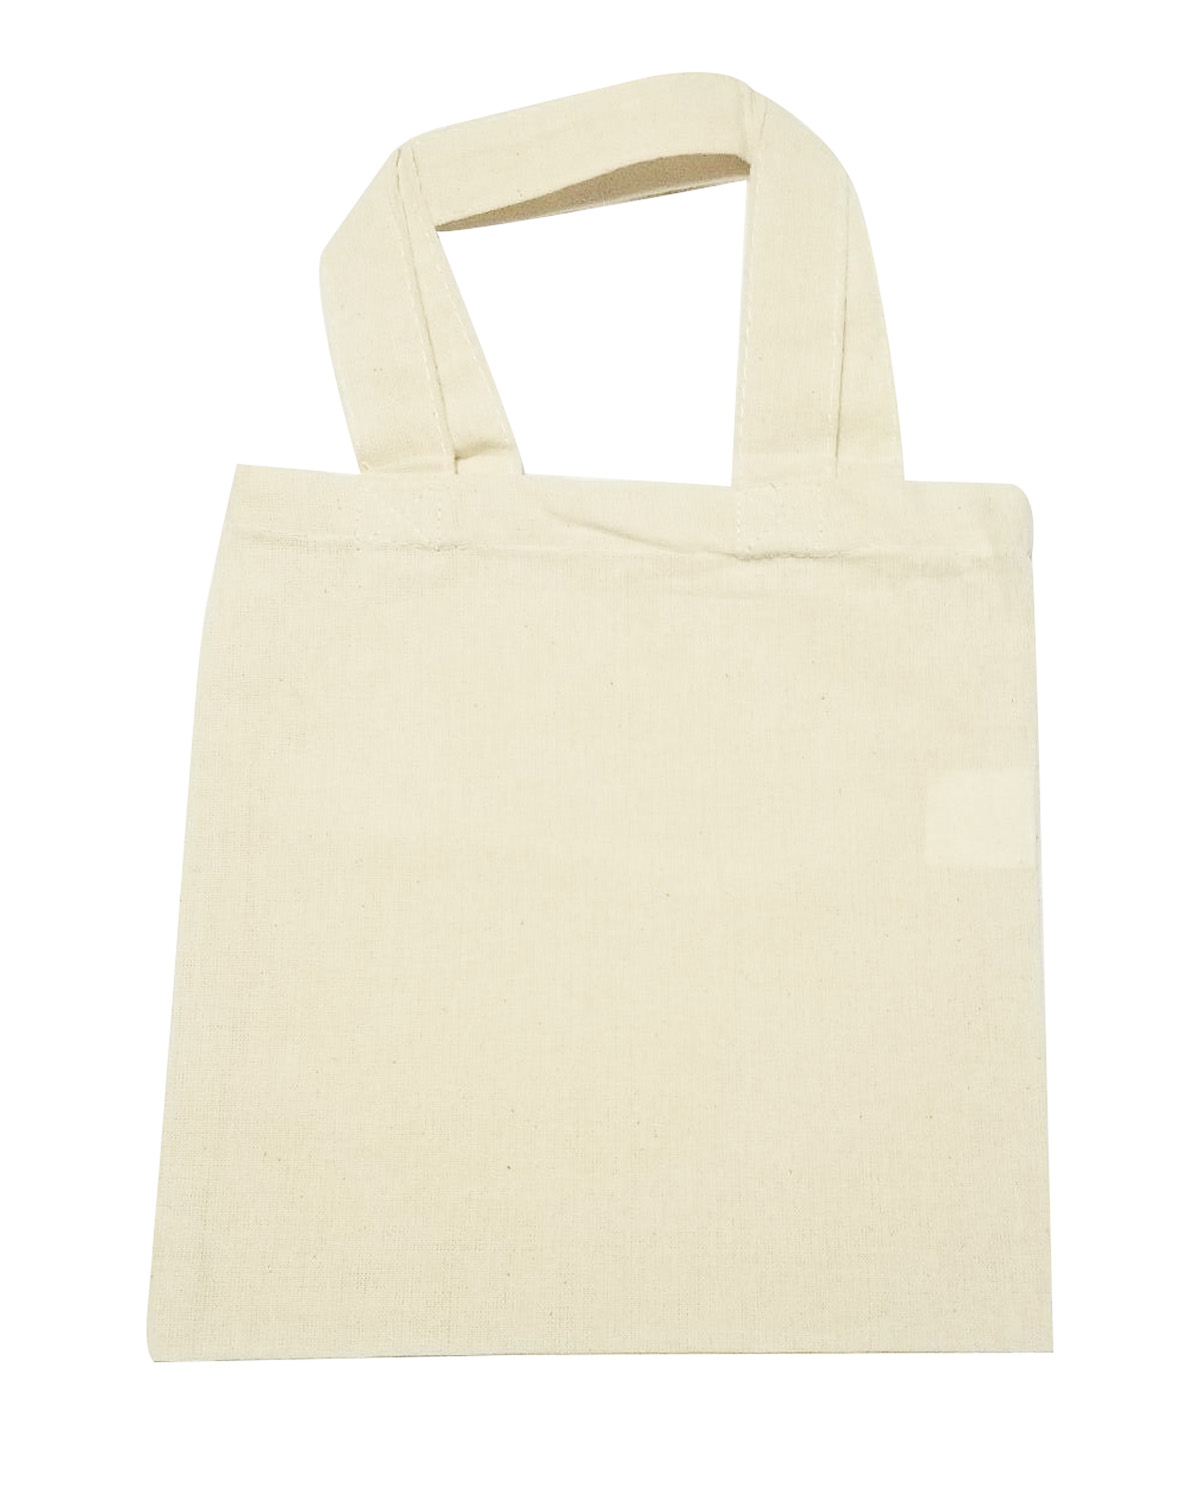 ''Natural Cotton Canvas Tote Bags - 8'''' x 8''''''